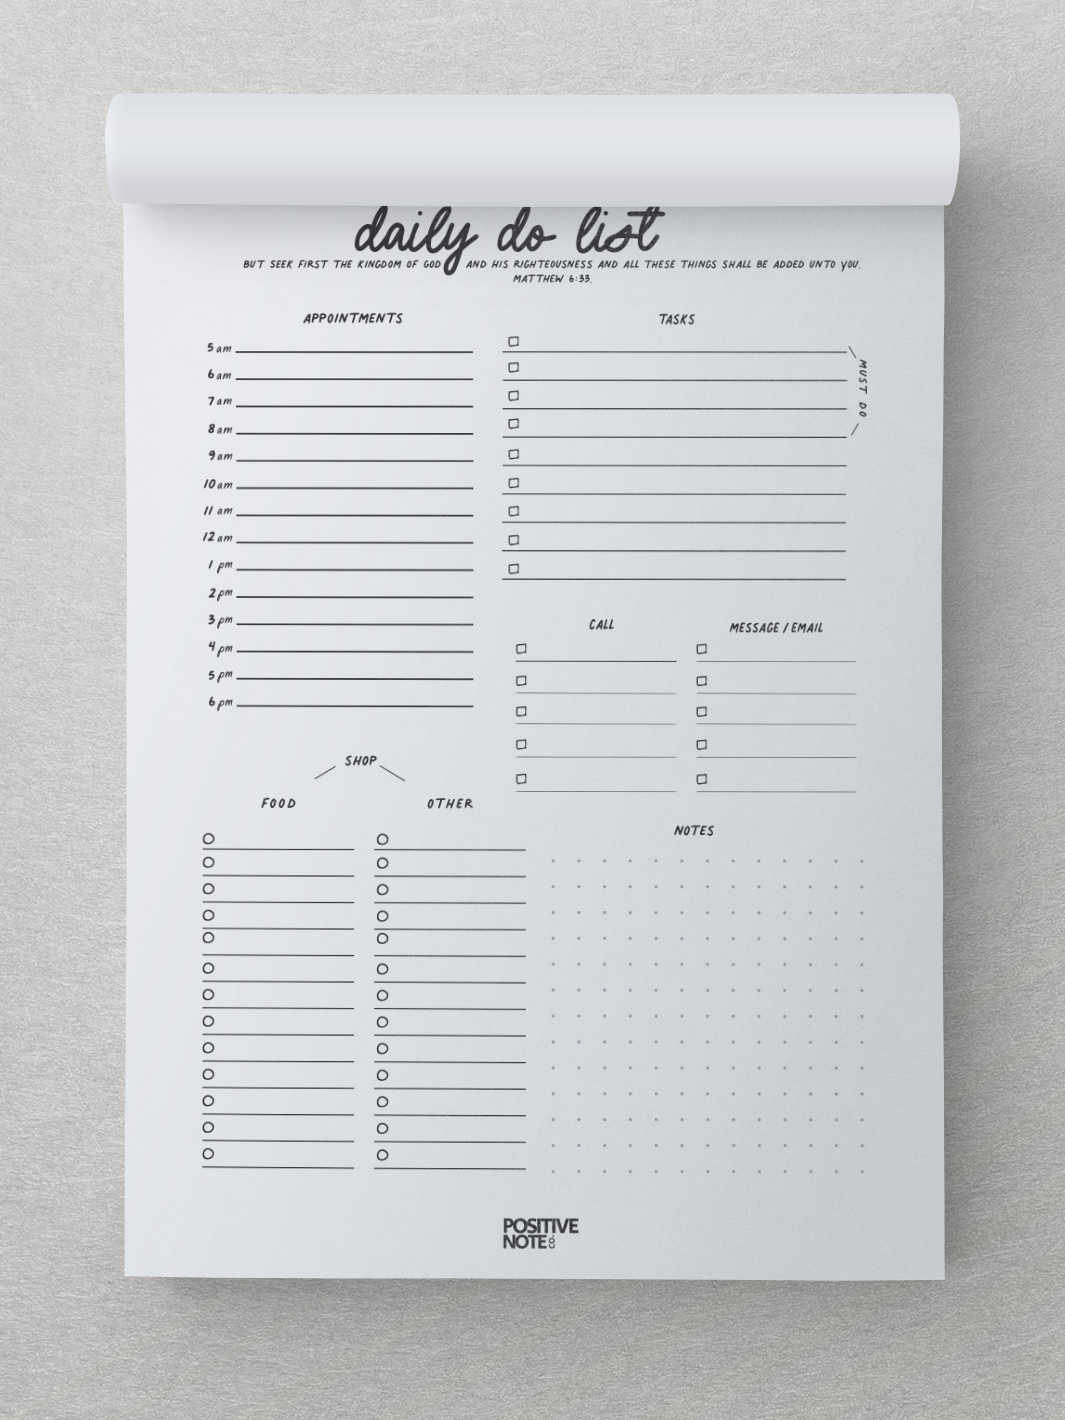 A notepad reads Daily Do List in cursive font at the top. A bible verse is under the title.  The christian daily planner notepad has a place for appointments, tasks, notes, calls, messages and emails and shopping lists.